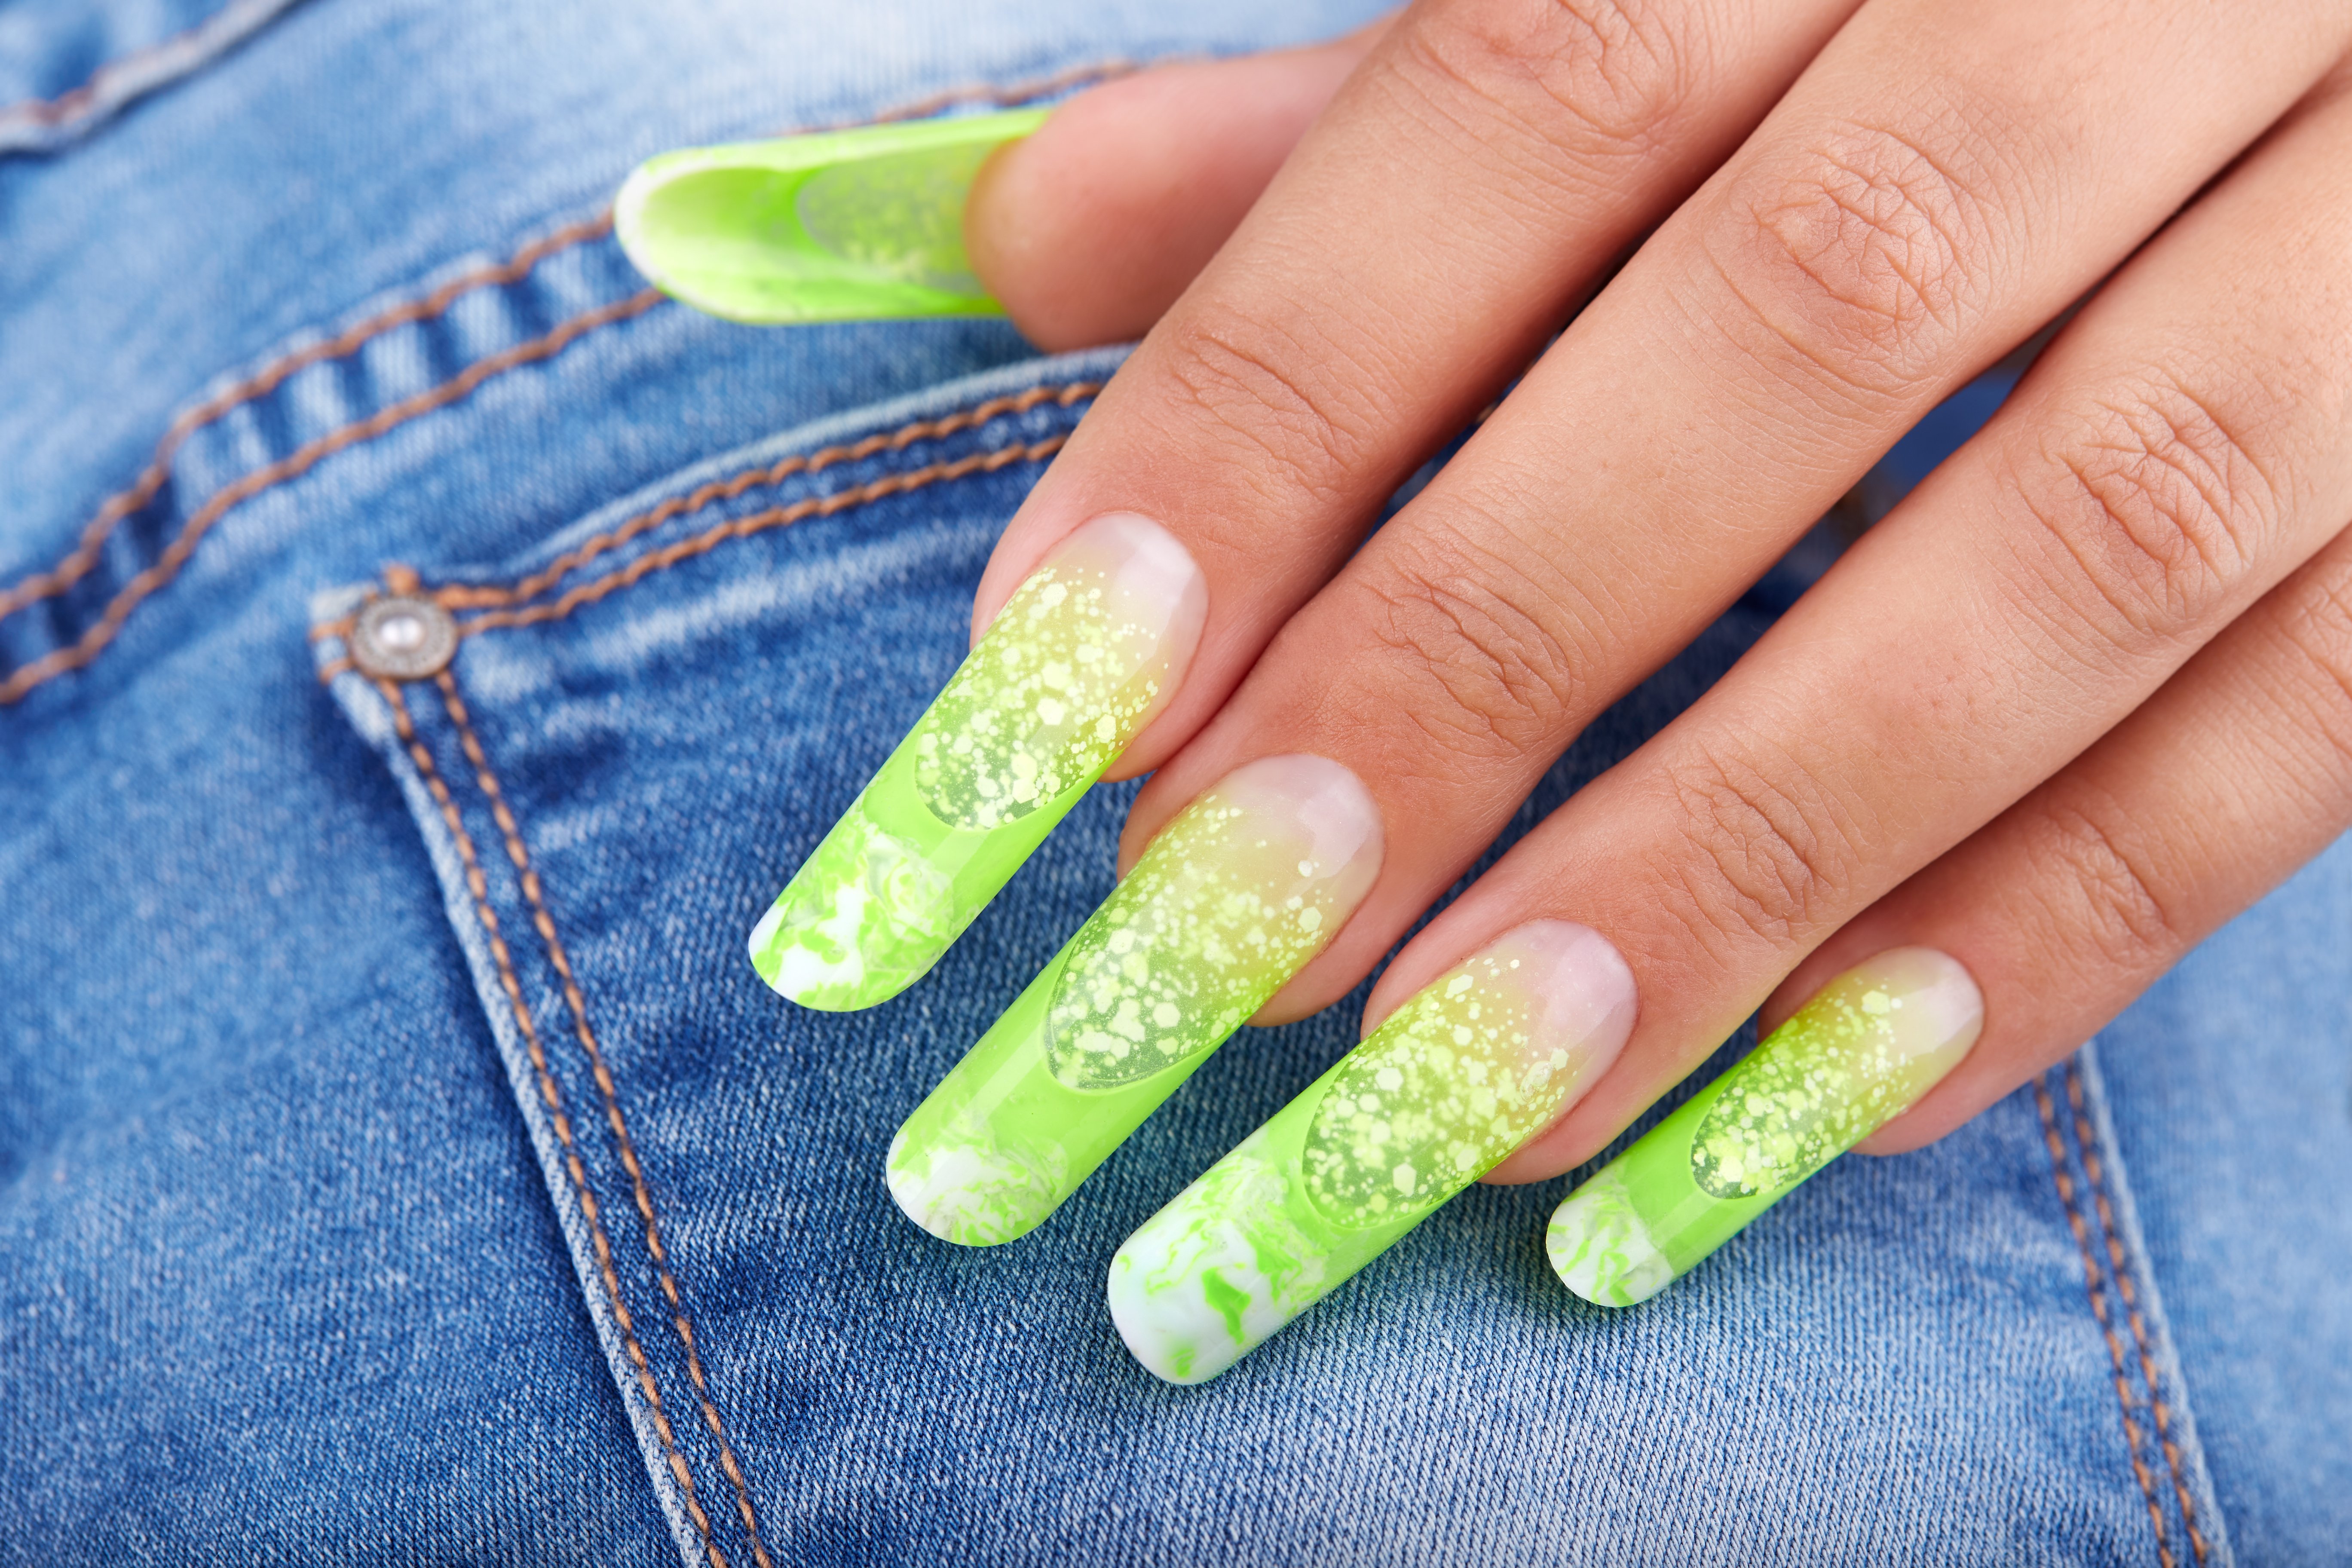 Neon and white manicure. | Source: Getty Images